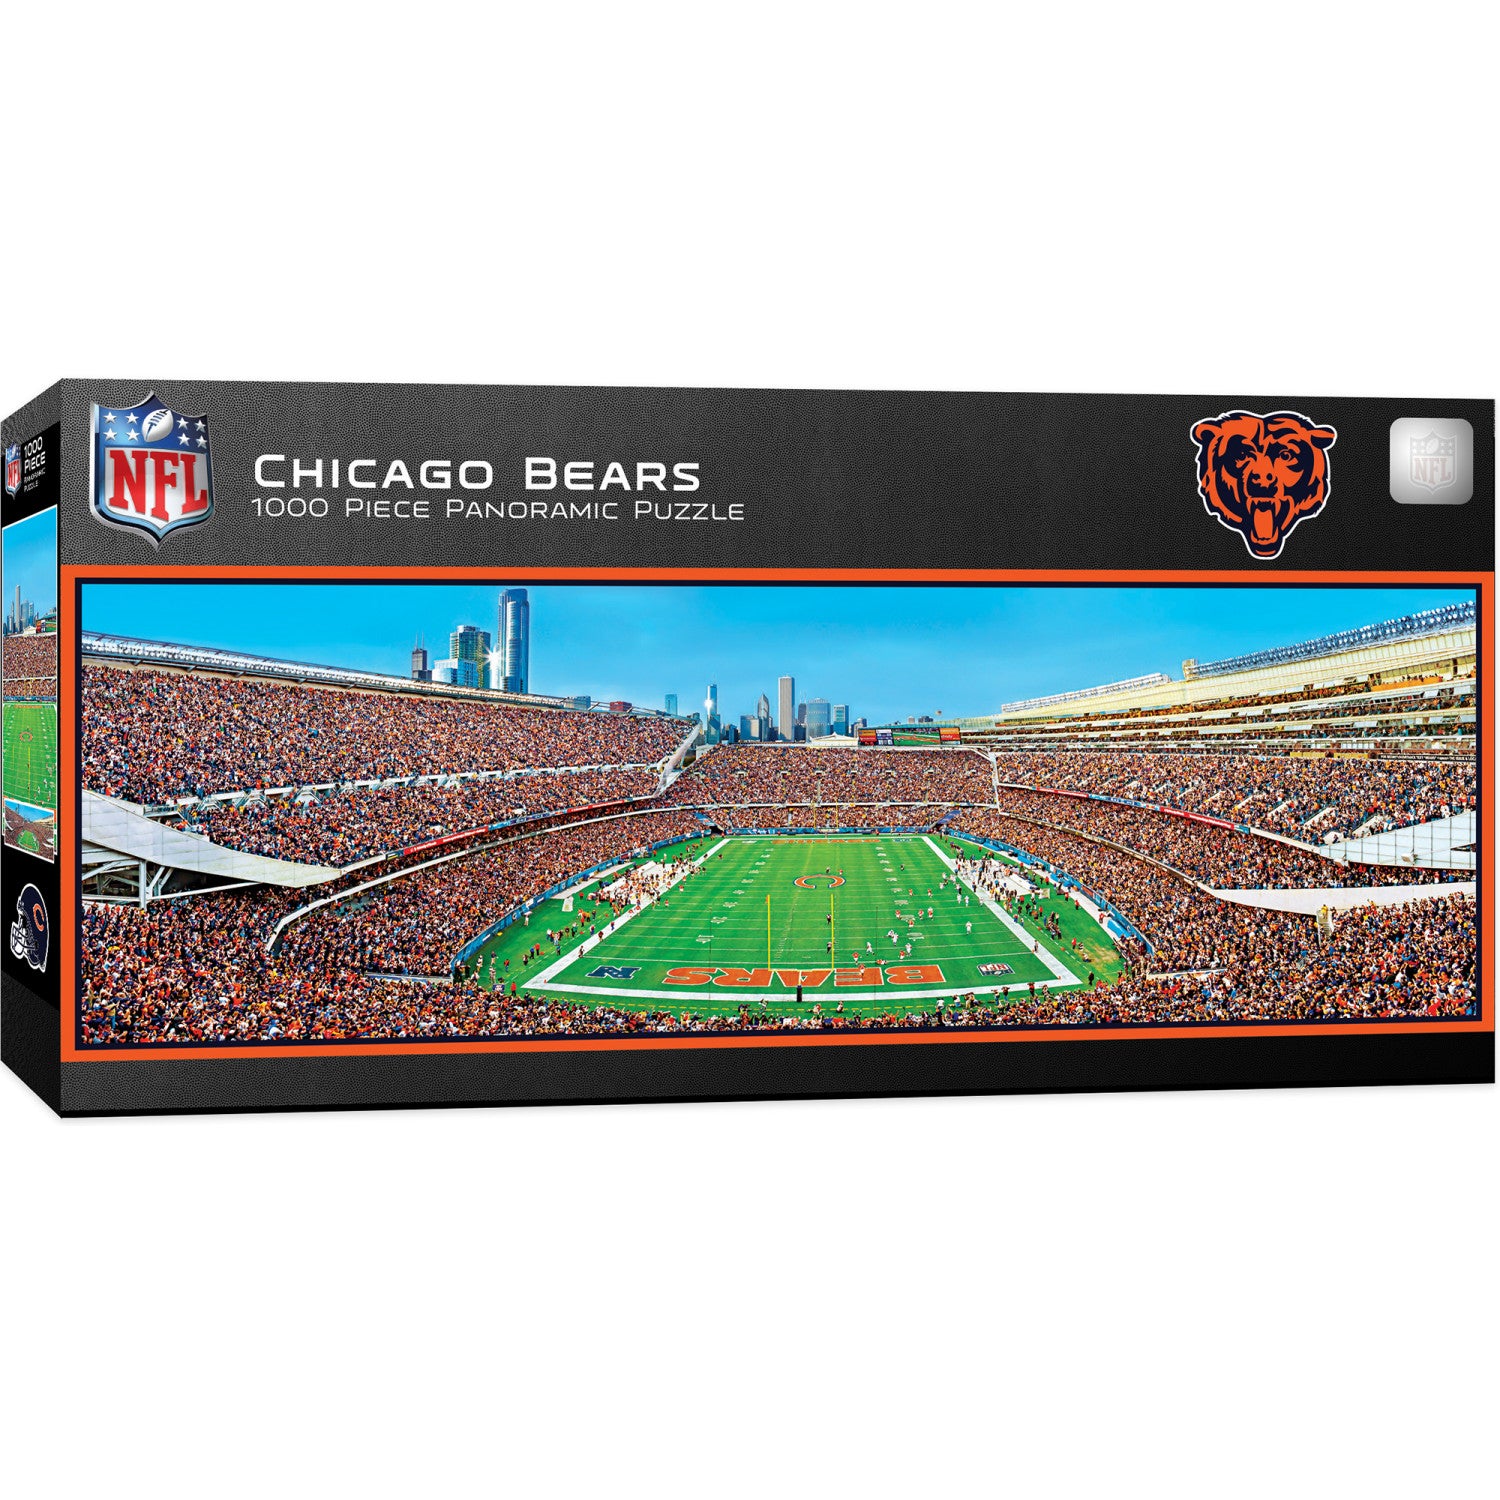 Chicago Bears - 1000 Piece Panoramic Puzzle - End View